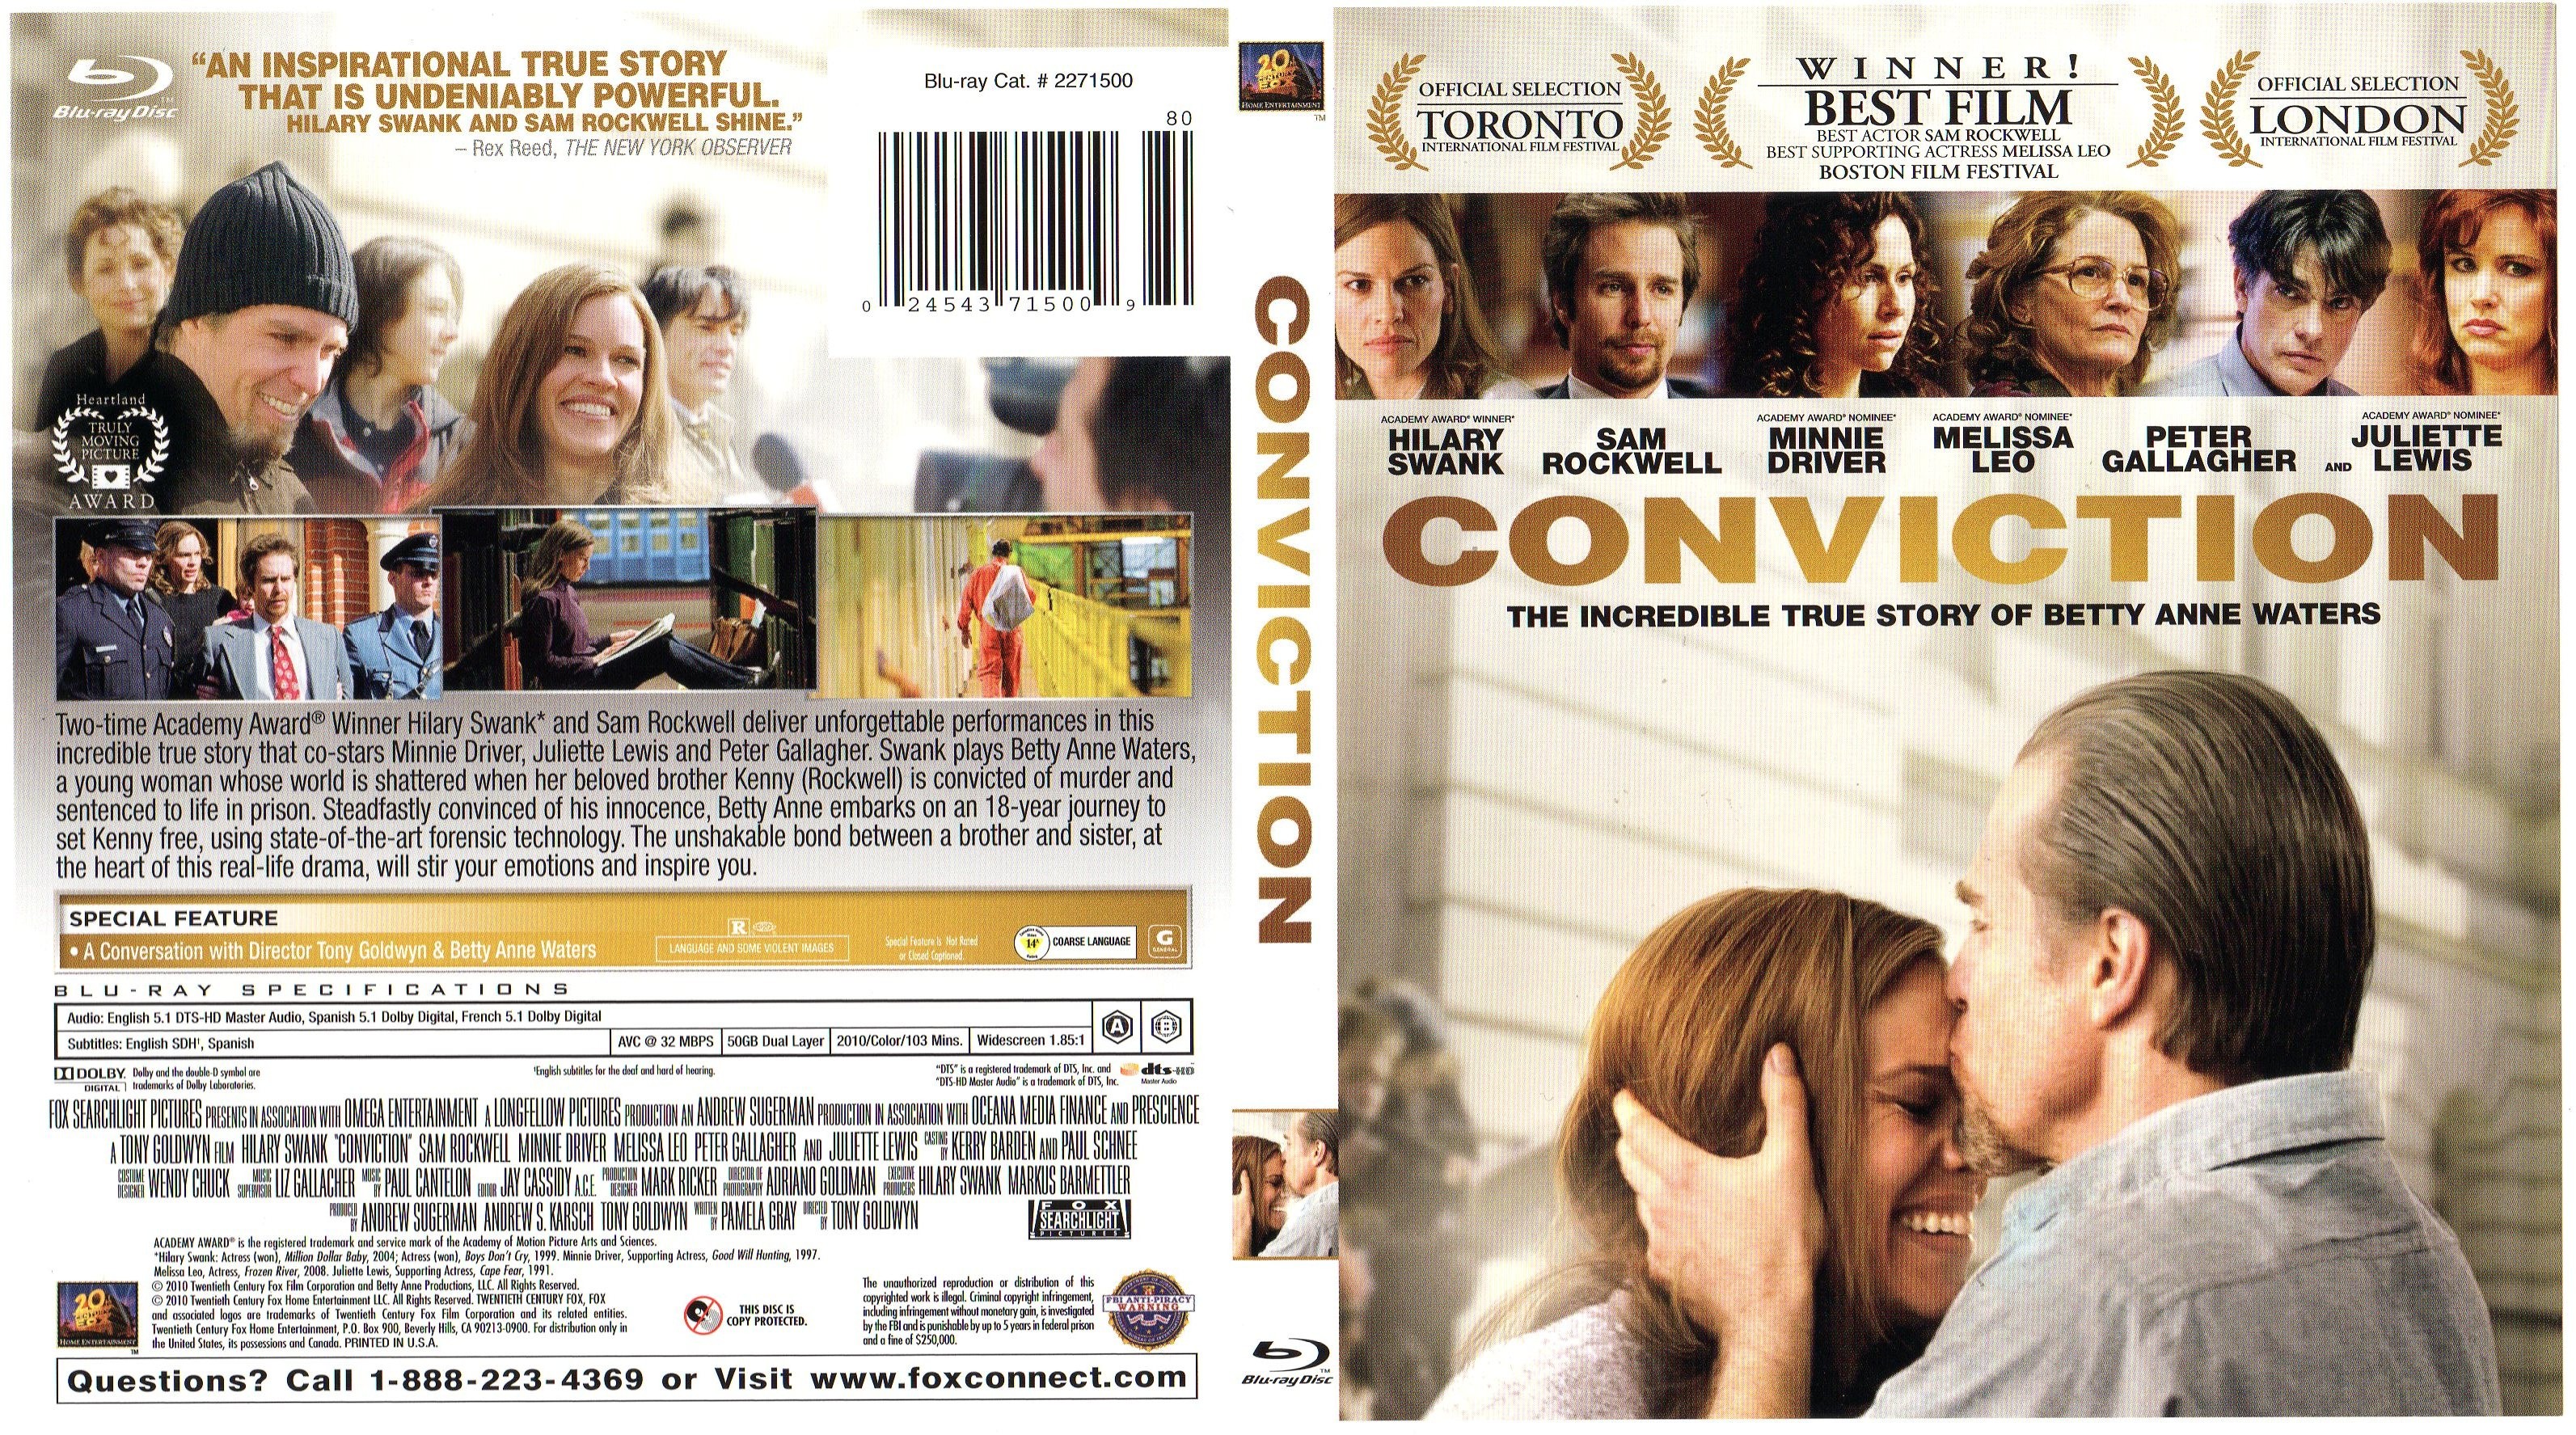 Jaquette DVD Conviction (Canadienne) (BLU-RAY)